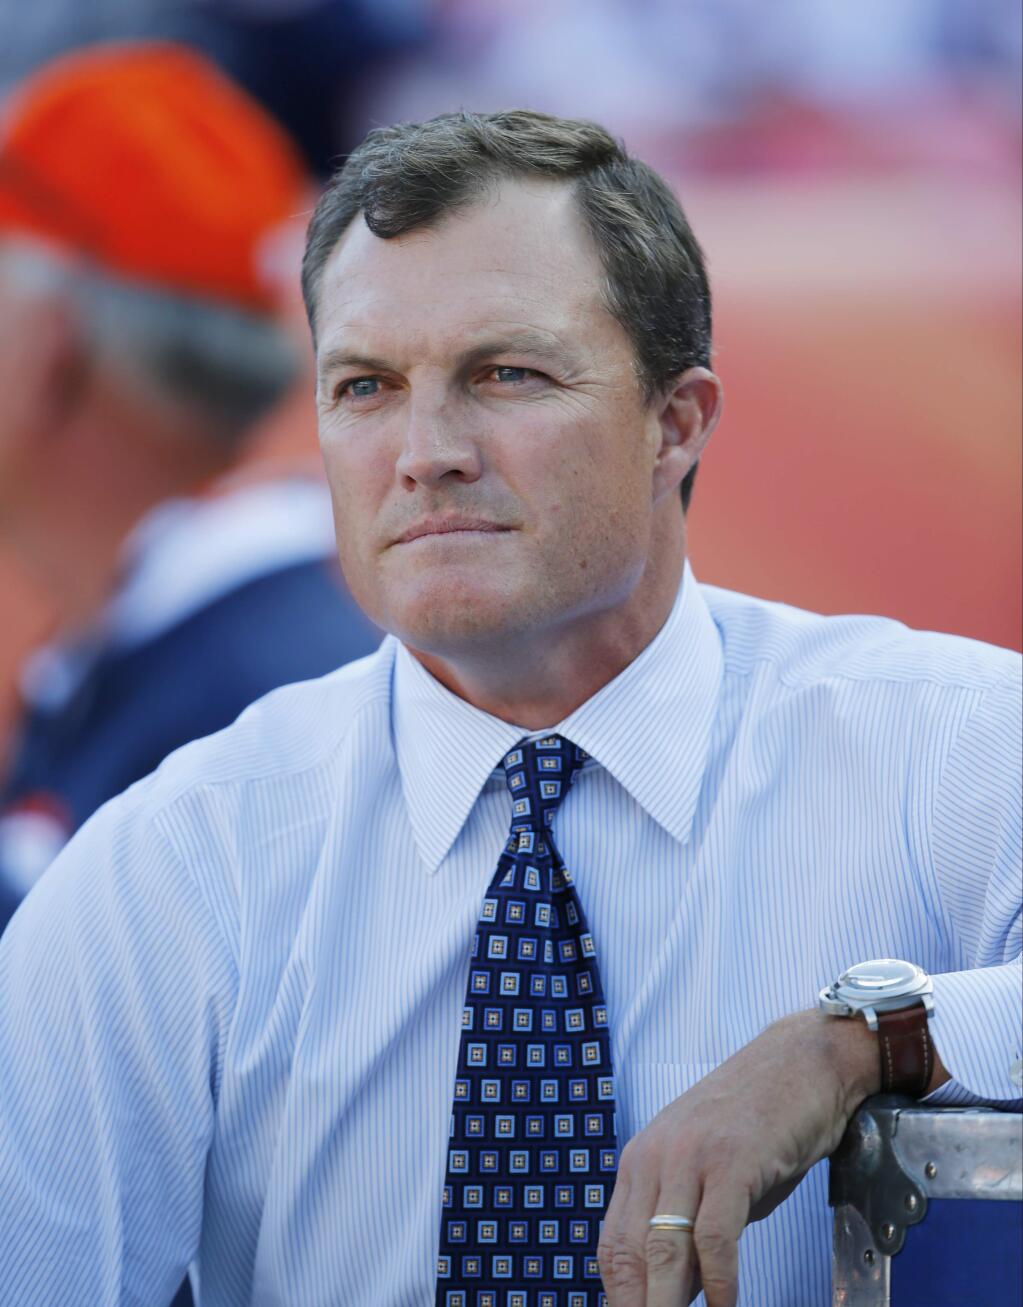 Former NFL football safety John Lynch, now a broadcast analyst for FOX sports, sits on the sideline before a preseason NFL football game between the Denver Broncos and the San Francisco 49ers, Saturday, Aug. 20, 2016, in Denver. (AP Photo/Jack Dempsey)